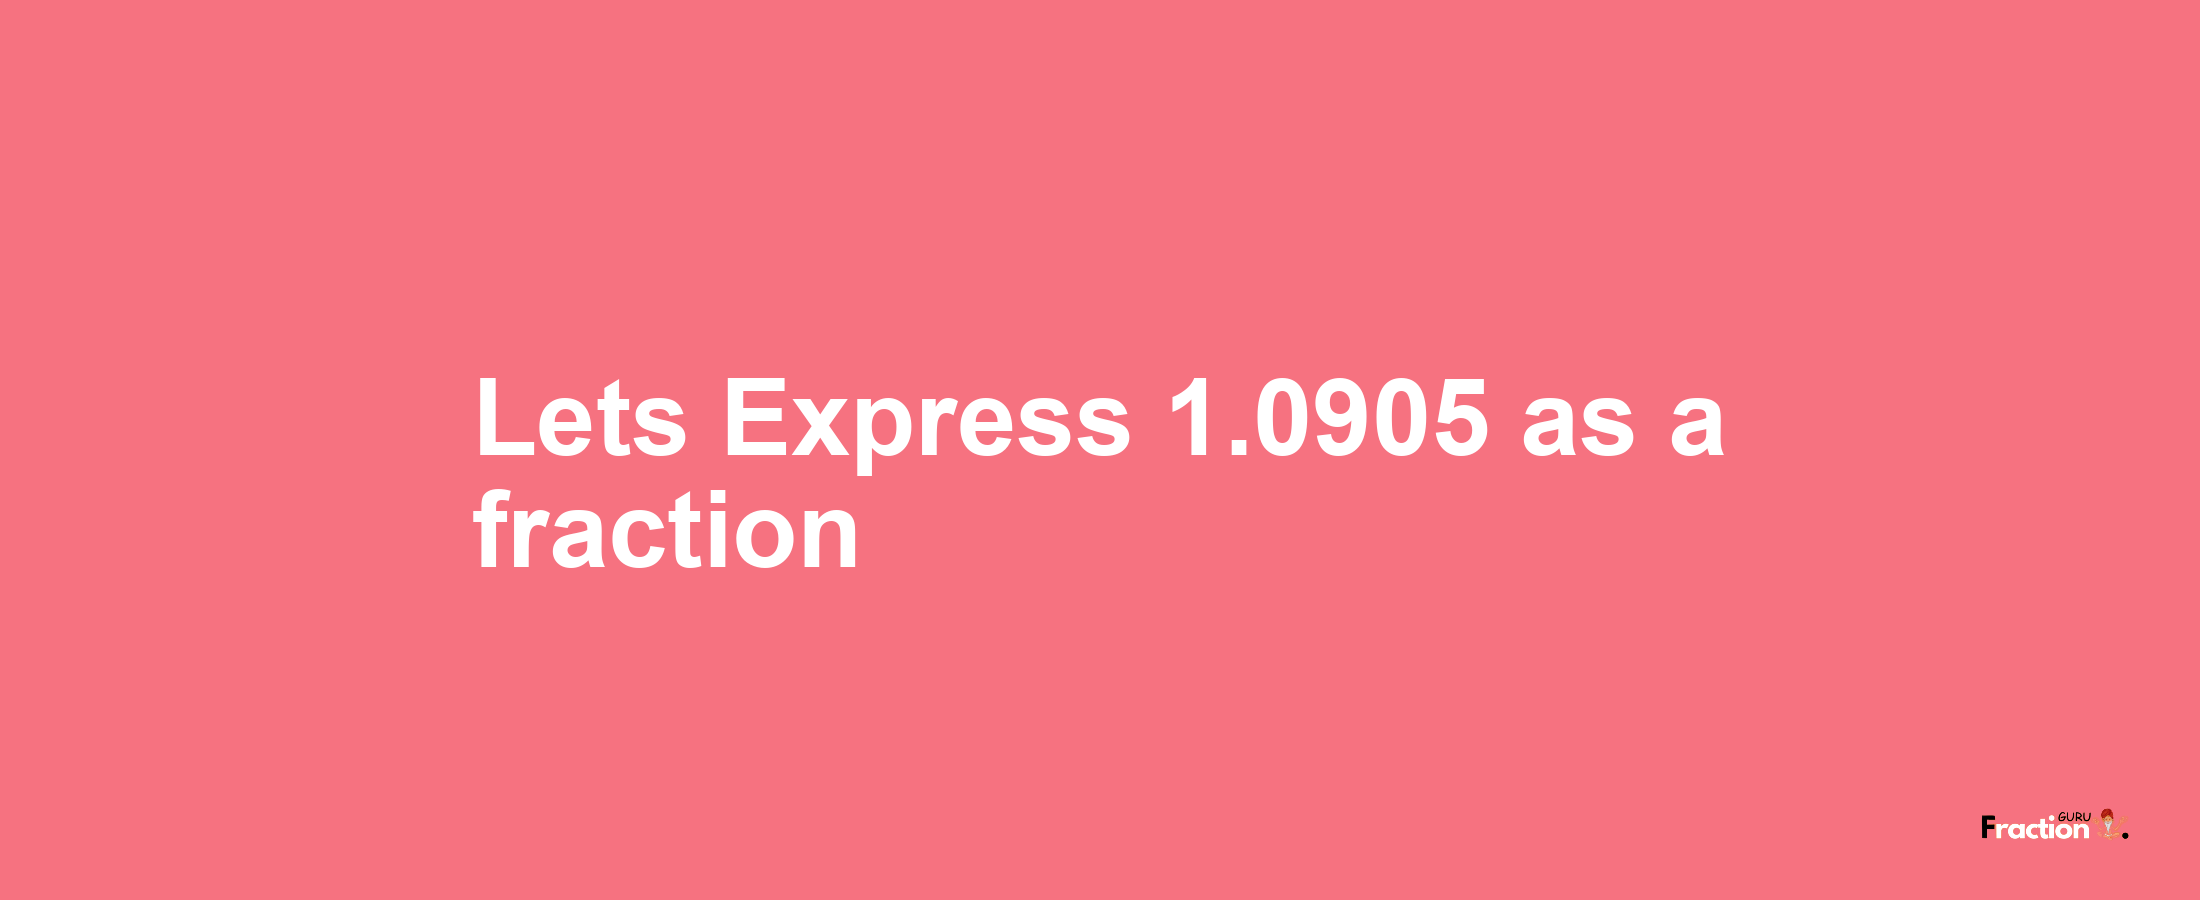 Lets Express 1.0905 as afraction